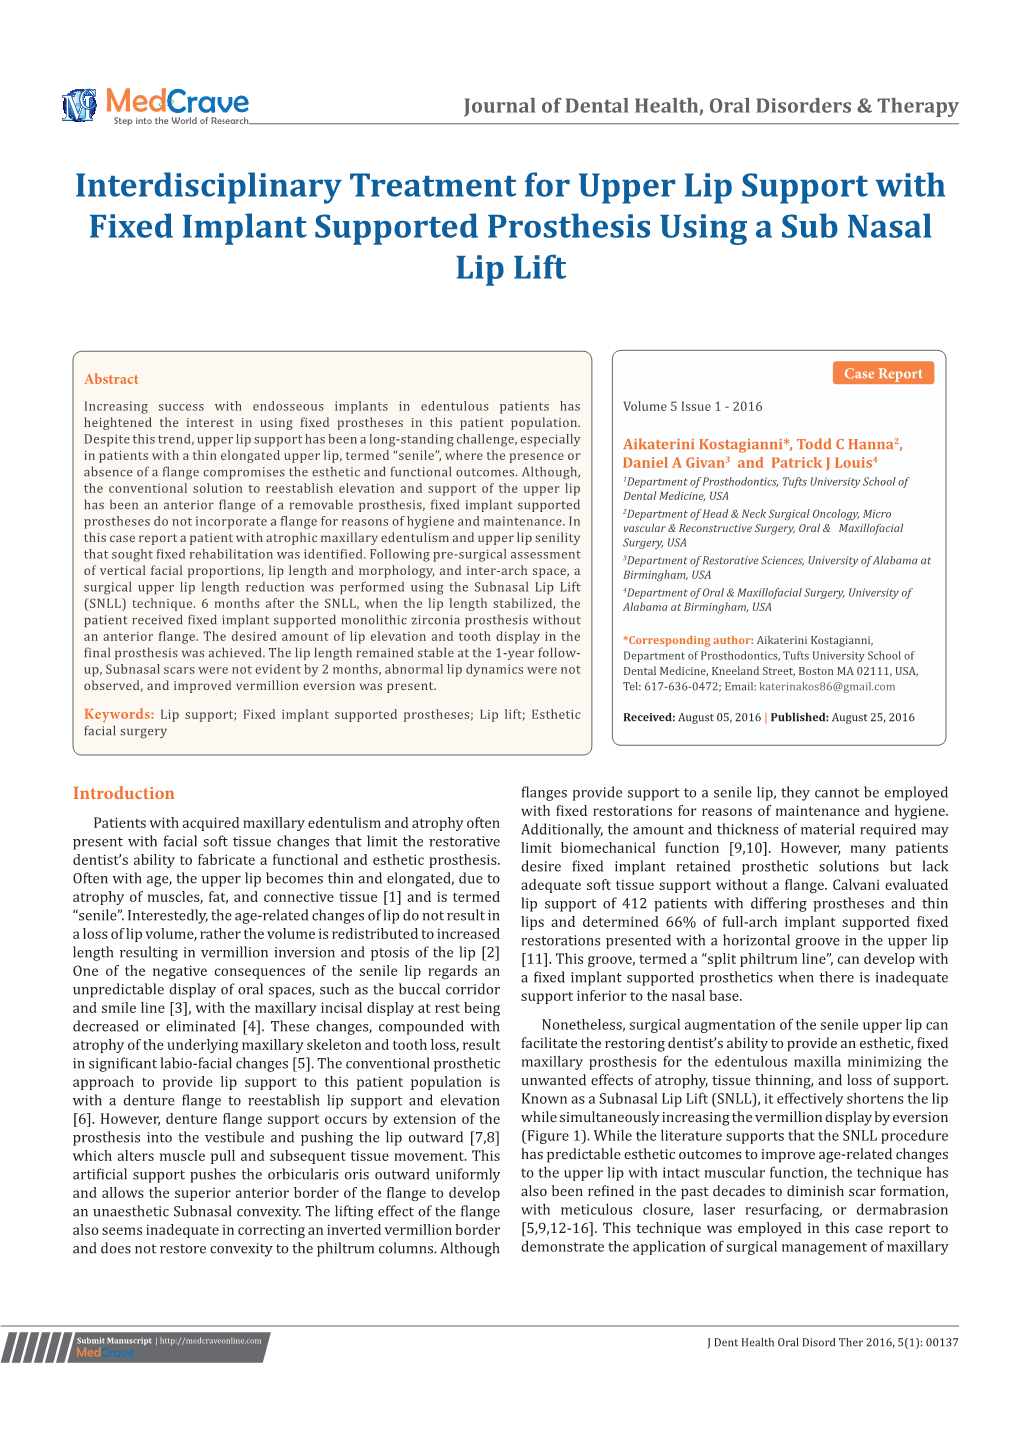 Interdisciplinary Treatment for Upper Lip Support with Fixed Implant Supported Prosthesis Using a Sub Nasal Lip Lift